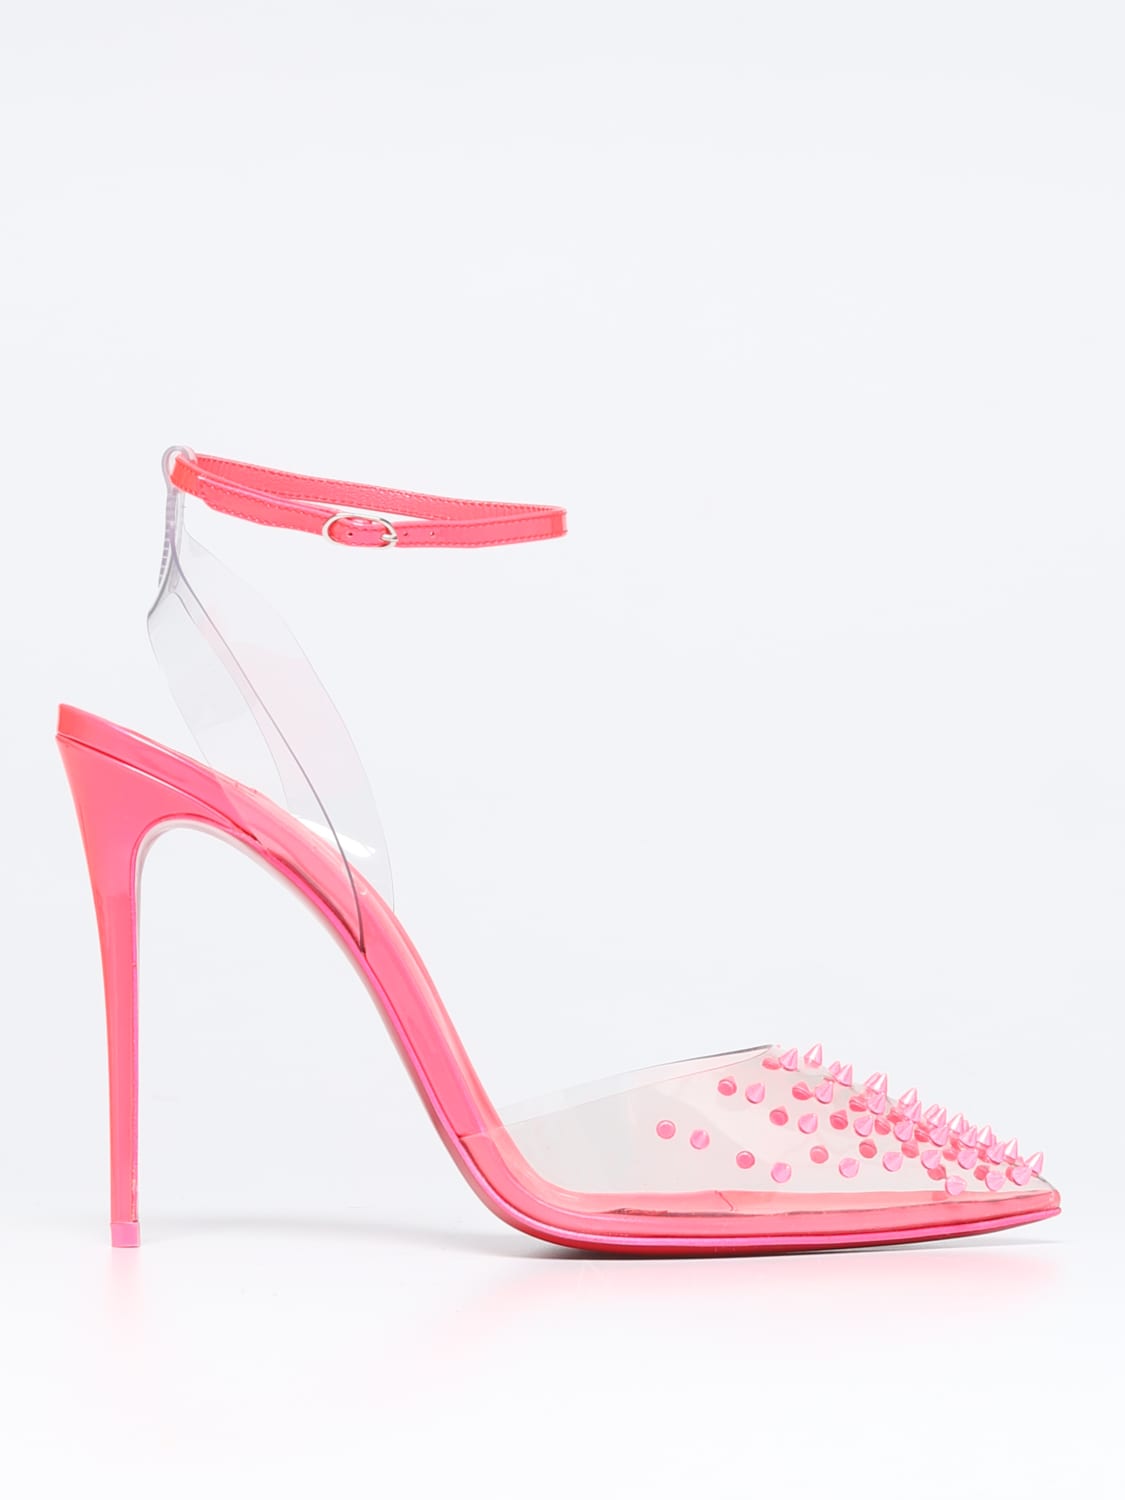 frekvens Indsigt strukturelt Christian Louboutin Outlet: Spikoo décolleté in leather and pvc - Fuchsia |  Christian Louboutin high heel shoes 1230753 online at GIGLIO.COM